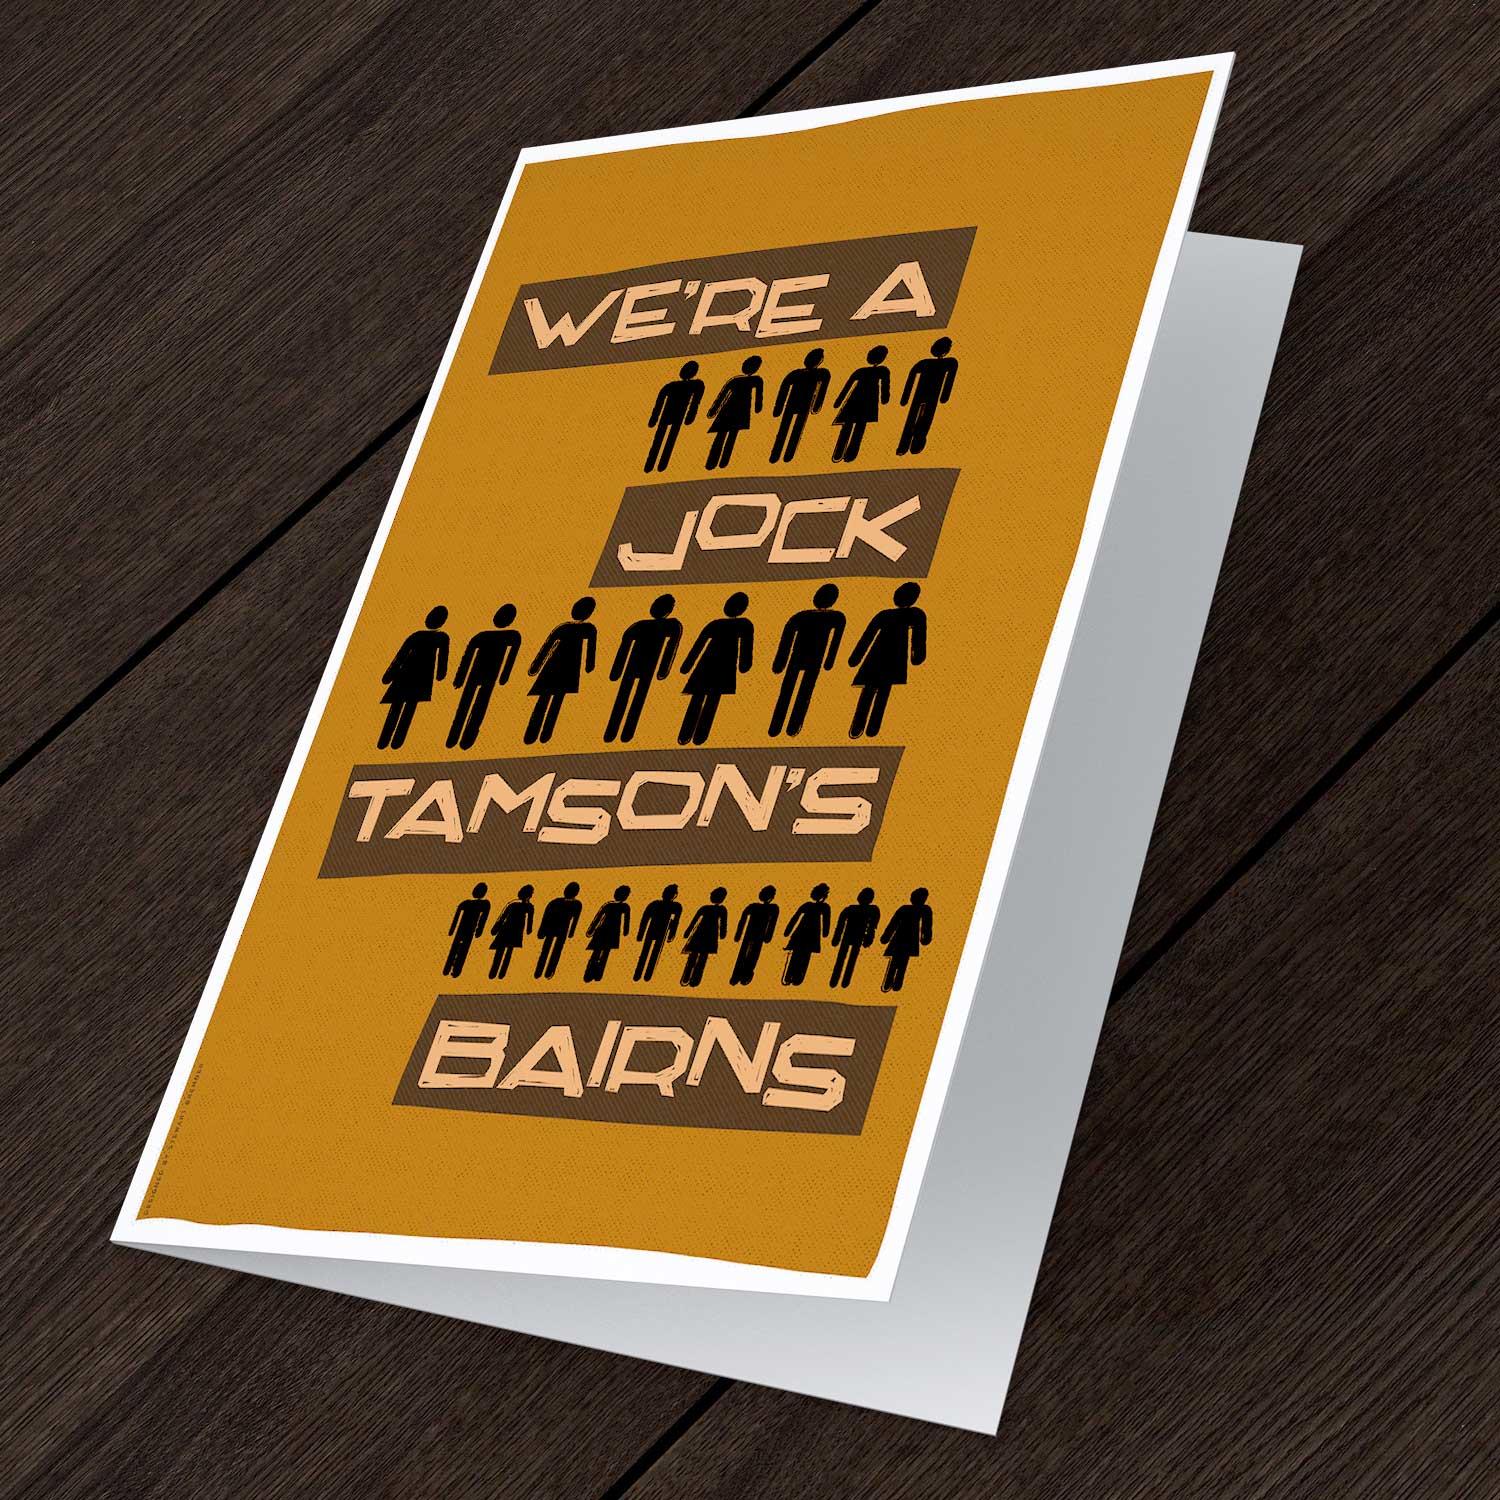 We're a Jock Tamson's Bairns Greeting Card from an original painting by artist Stewart Bremner